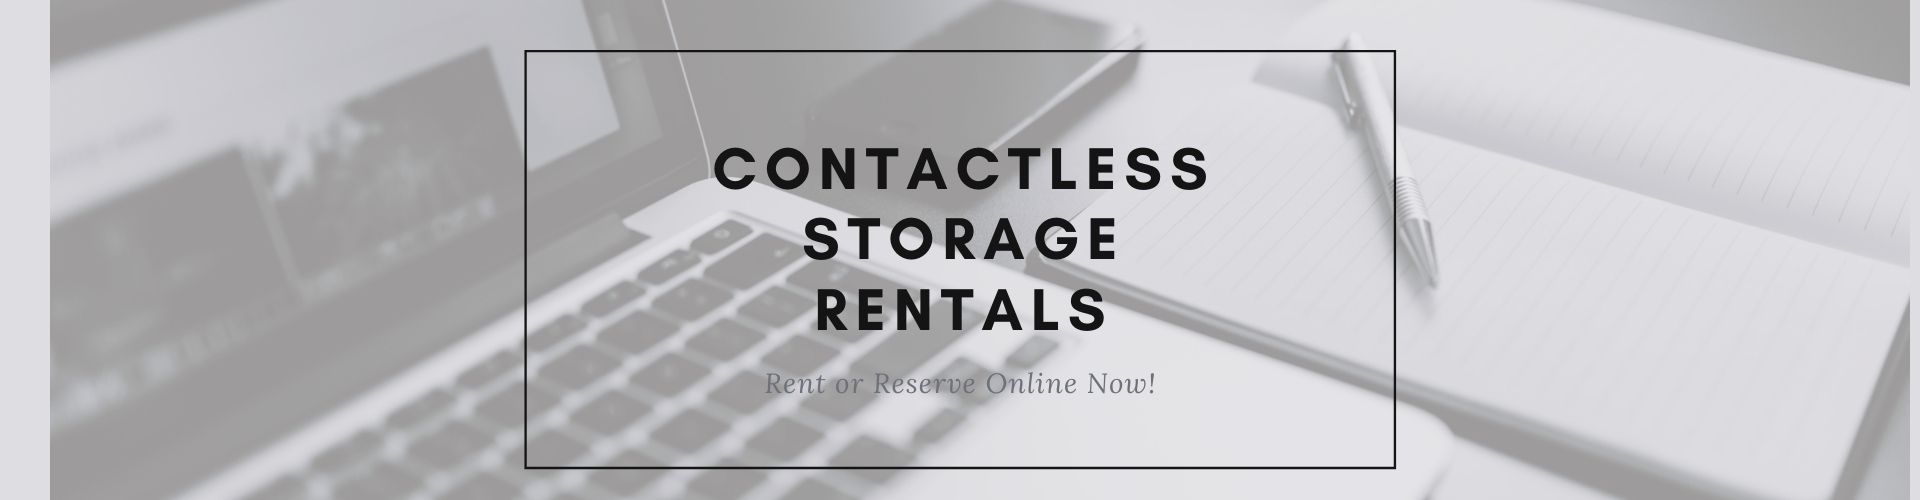 contactless storage rentals in Southern Delaware